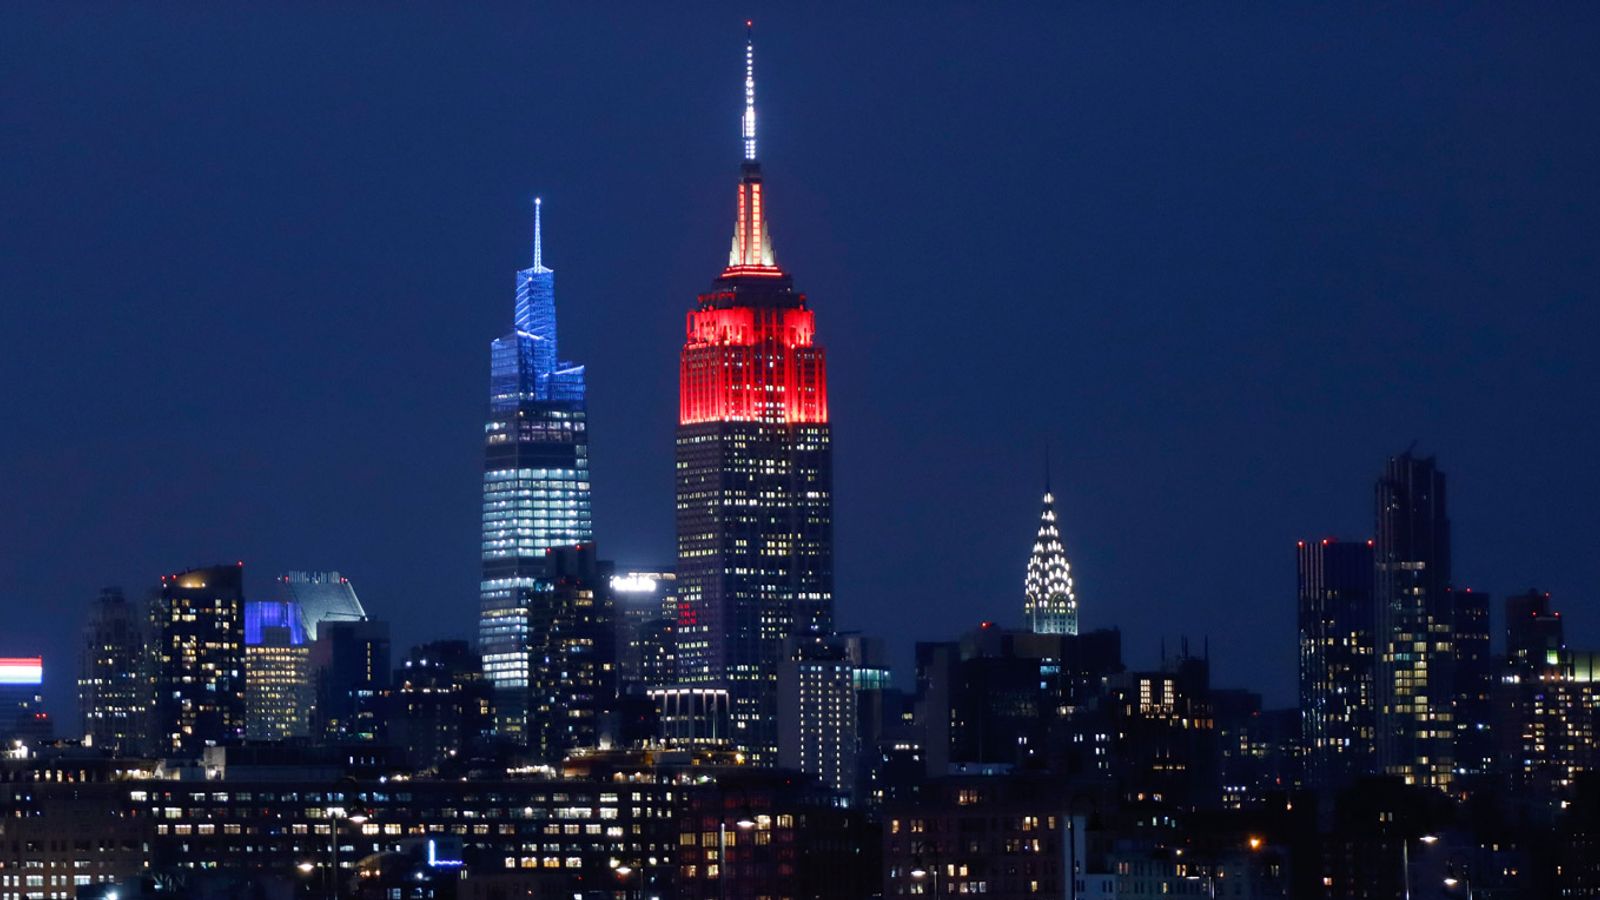 FC Bayern news: The Empire State Building lights up in red for FCB |  football news